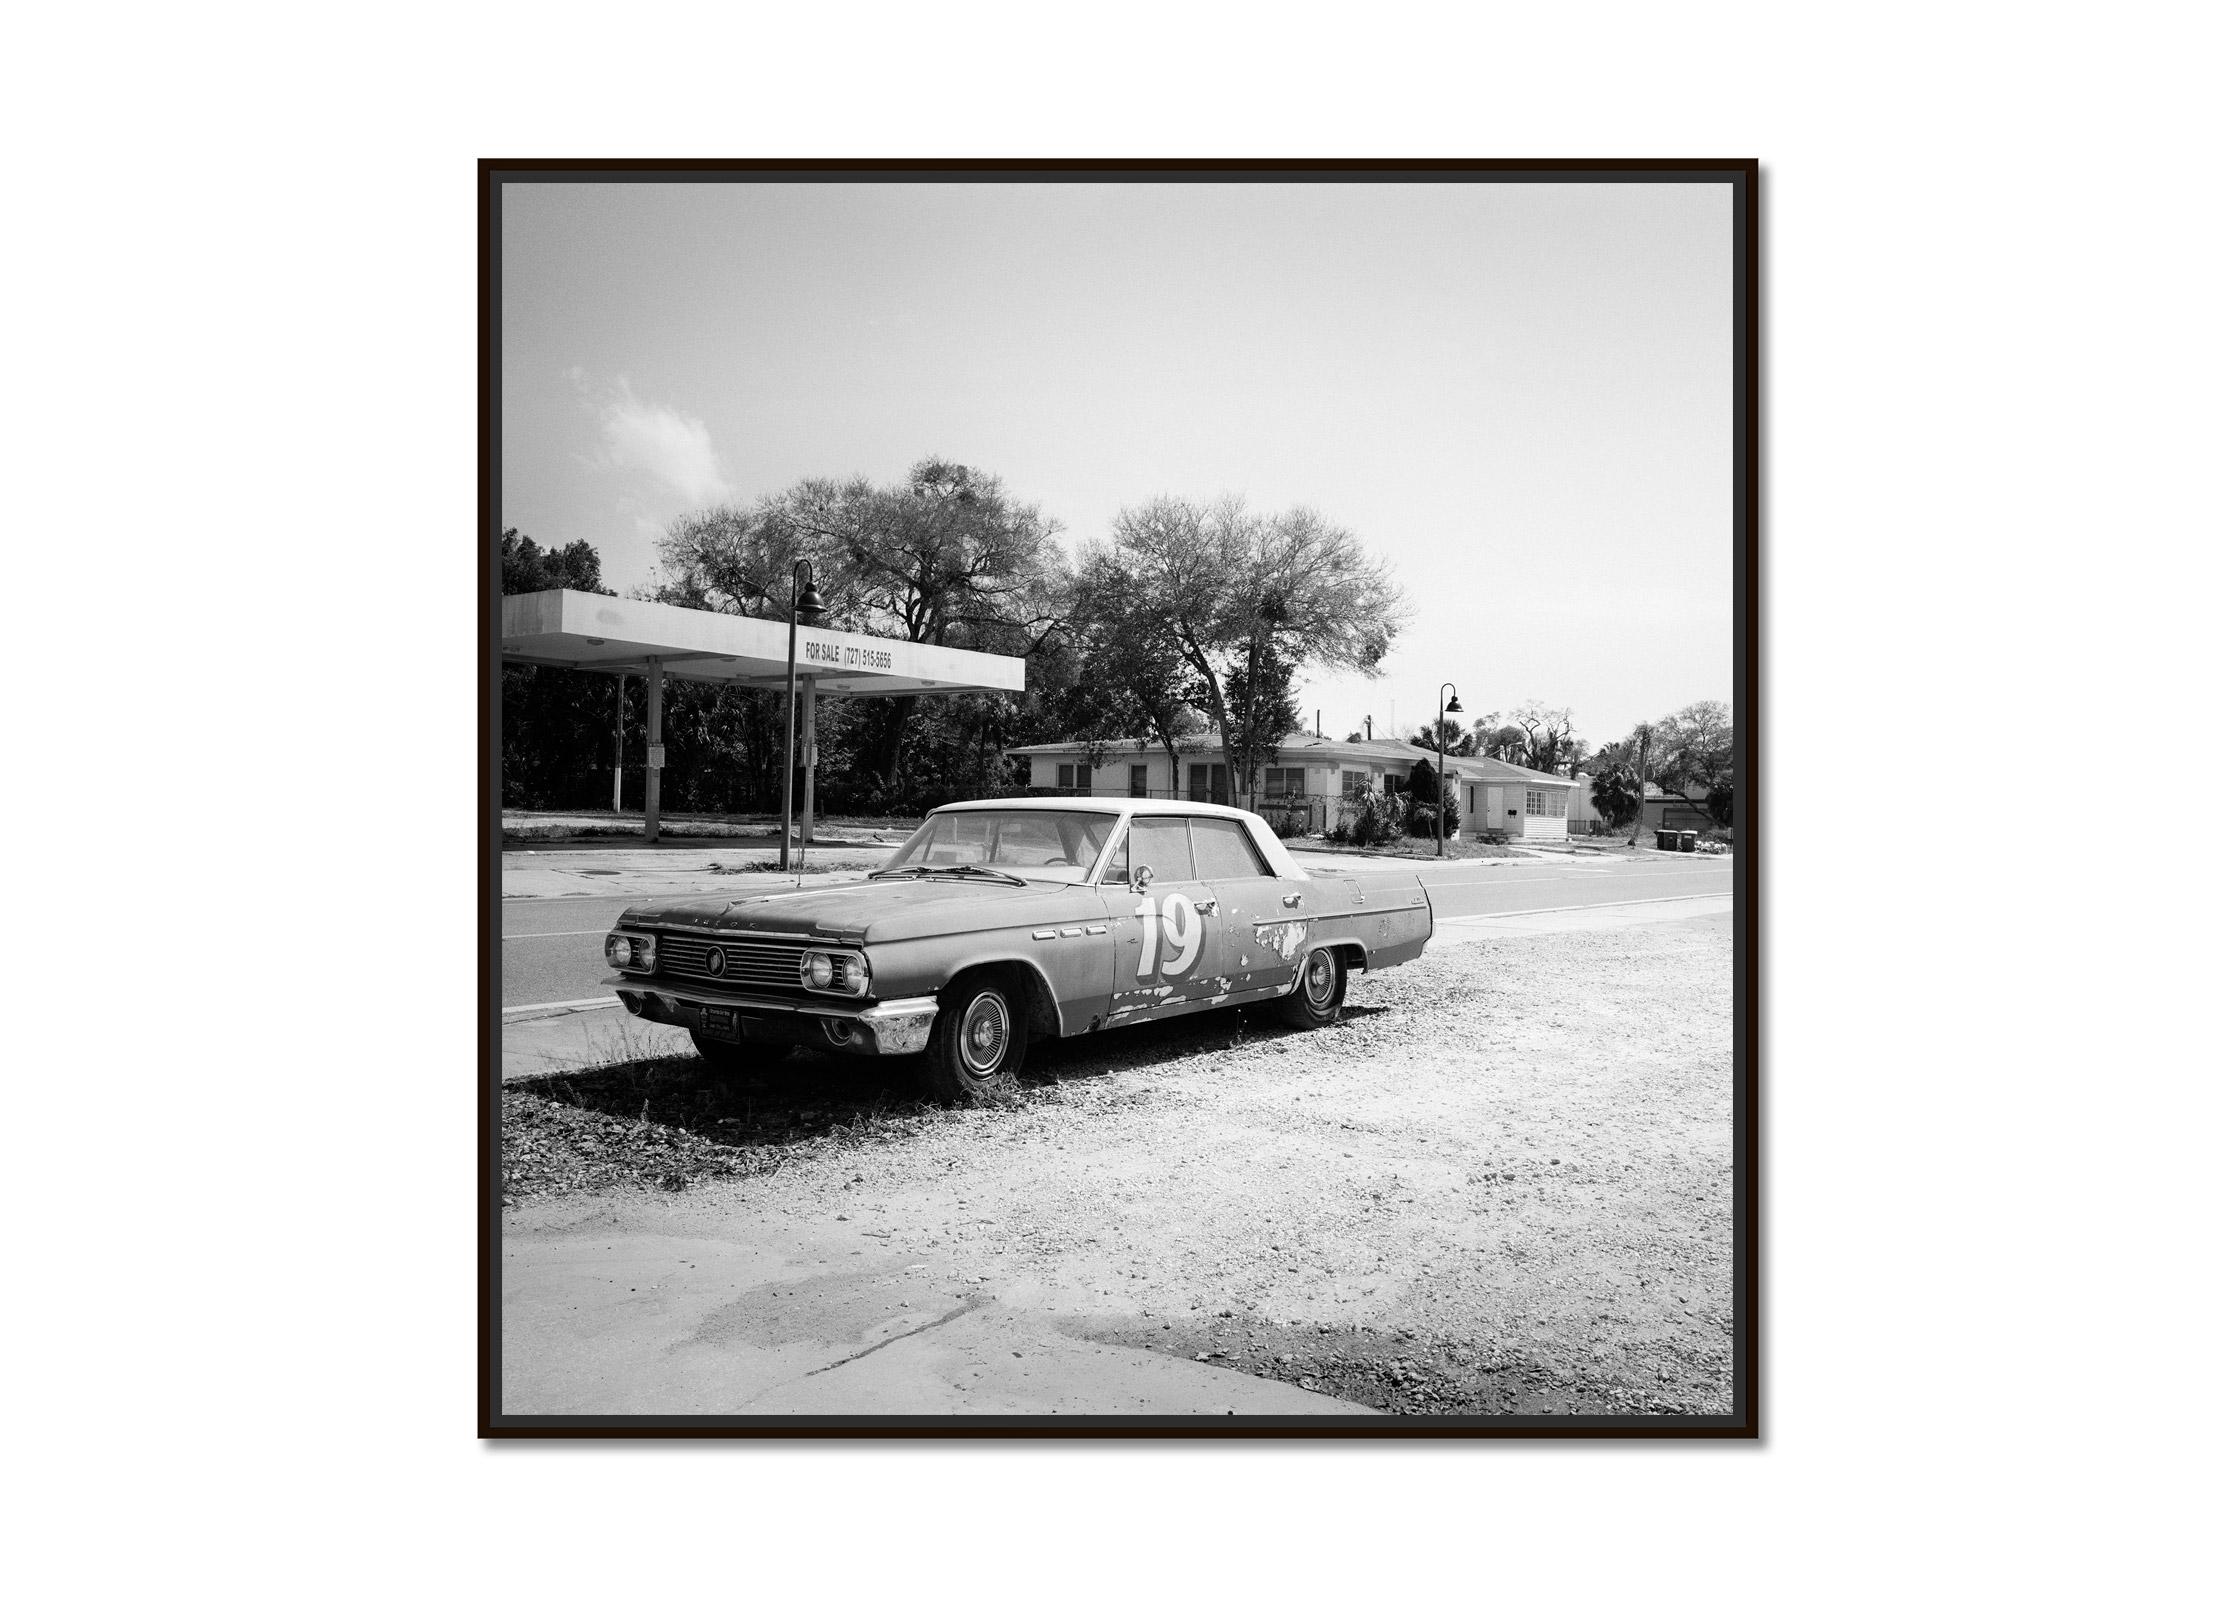 Buick for sale, classic car, Florida, USA, black and white landscape photography - Photograph by Gerald Berghammer